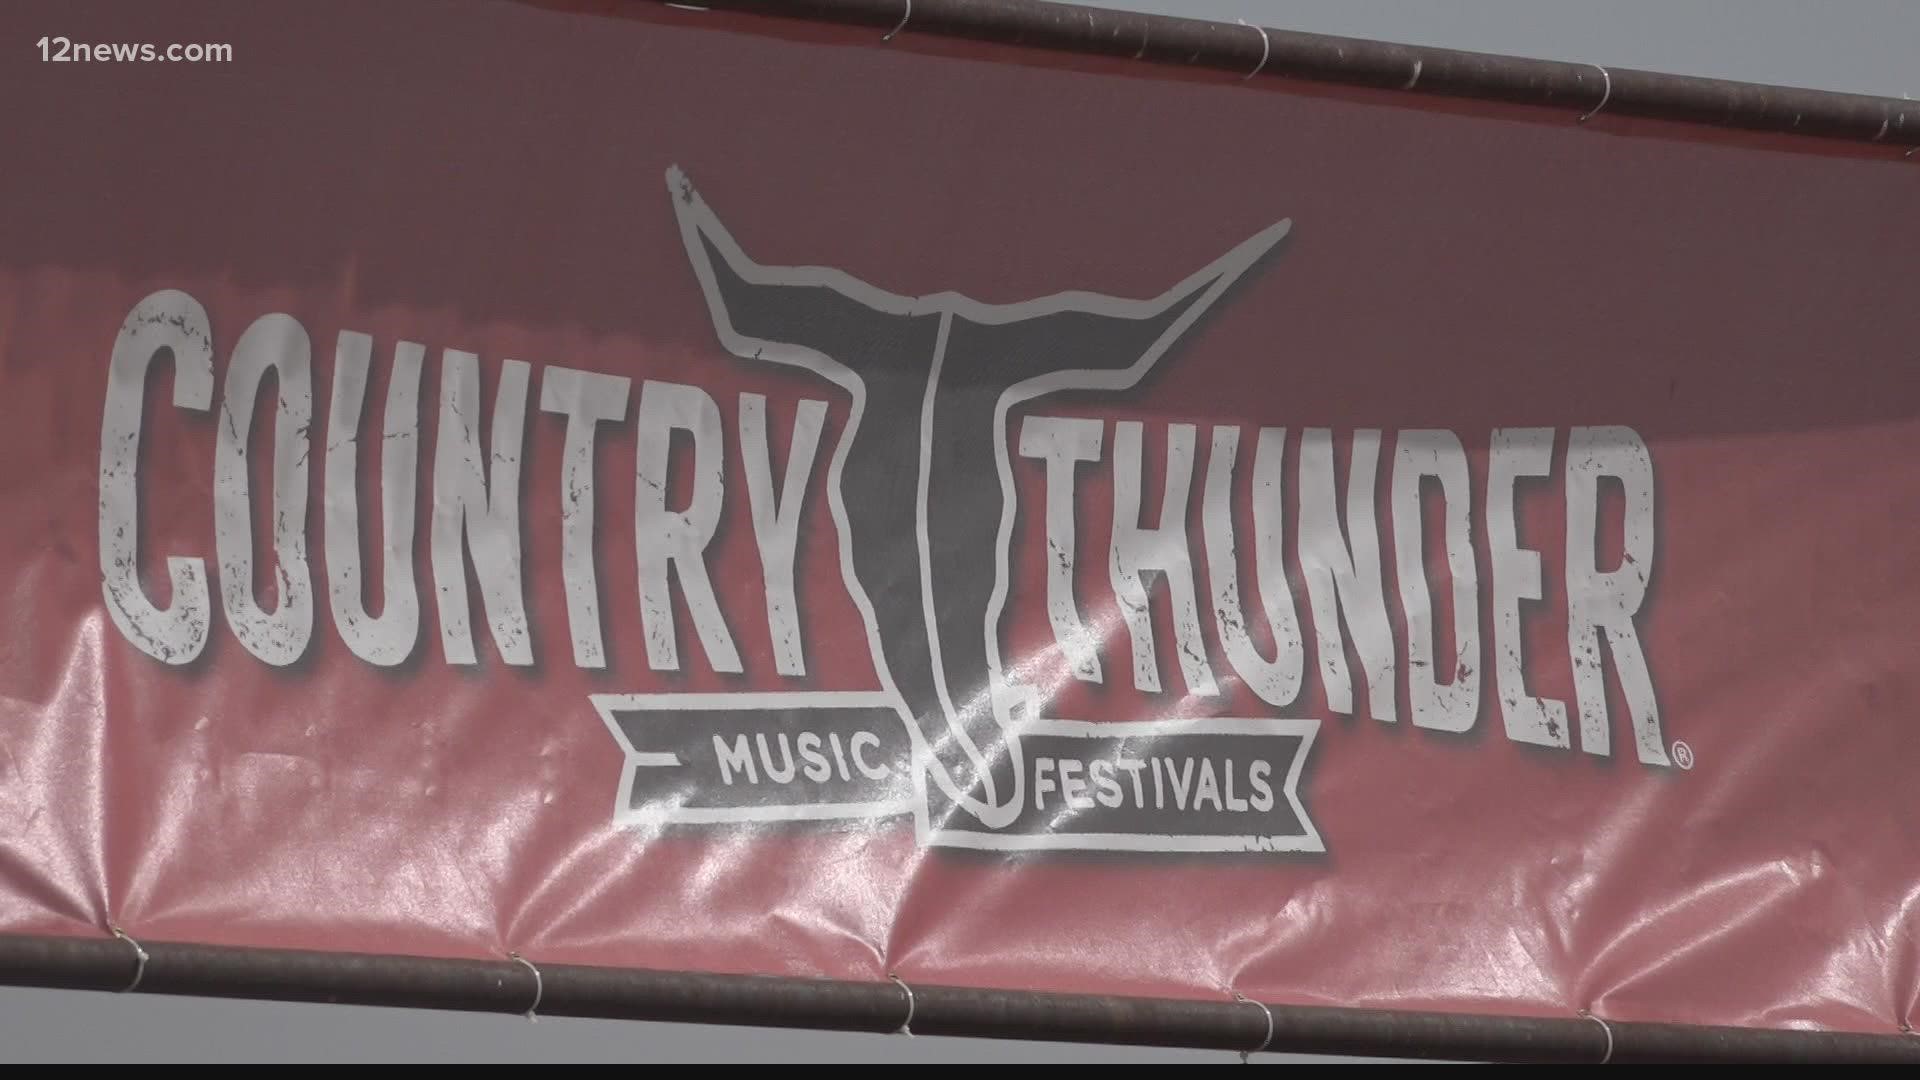 Country Thunder is returning for the first time since the pandemic started. 140,000 people are expected to attend the festival and COVID protocols will be in place.